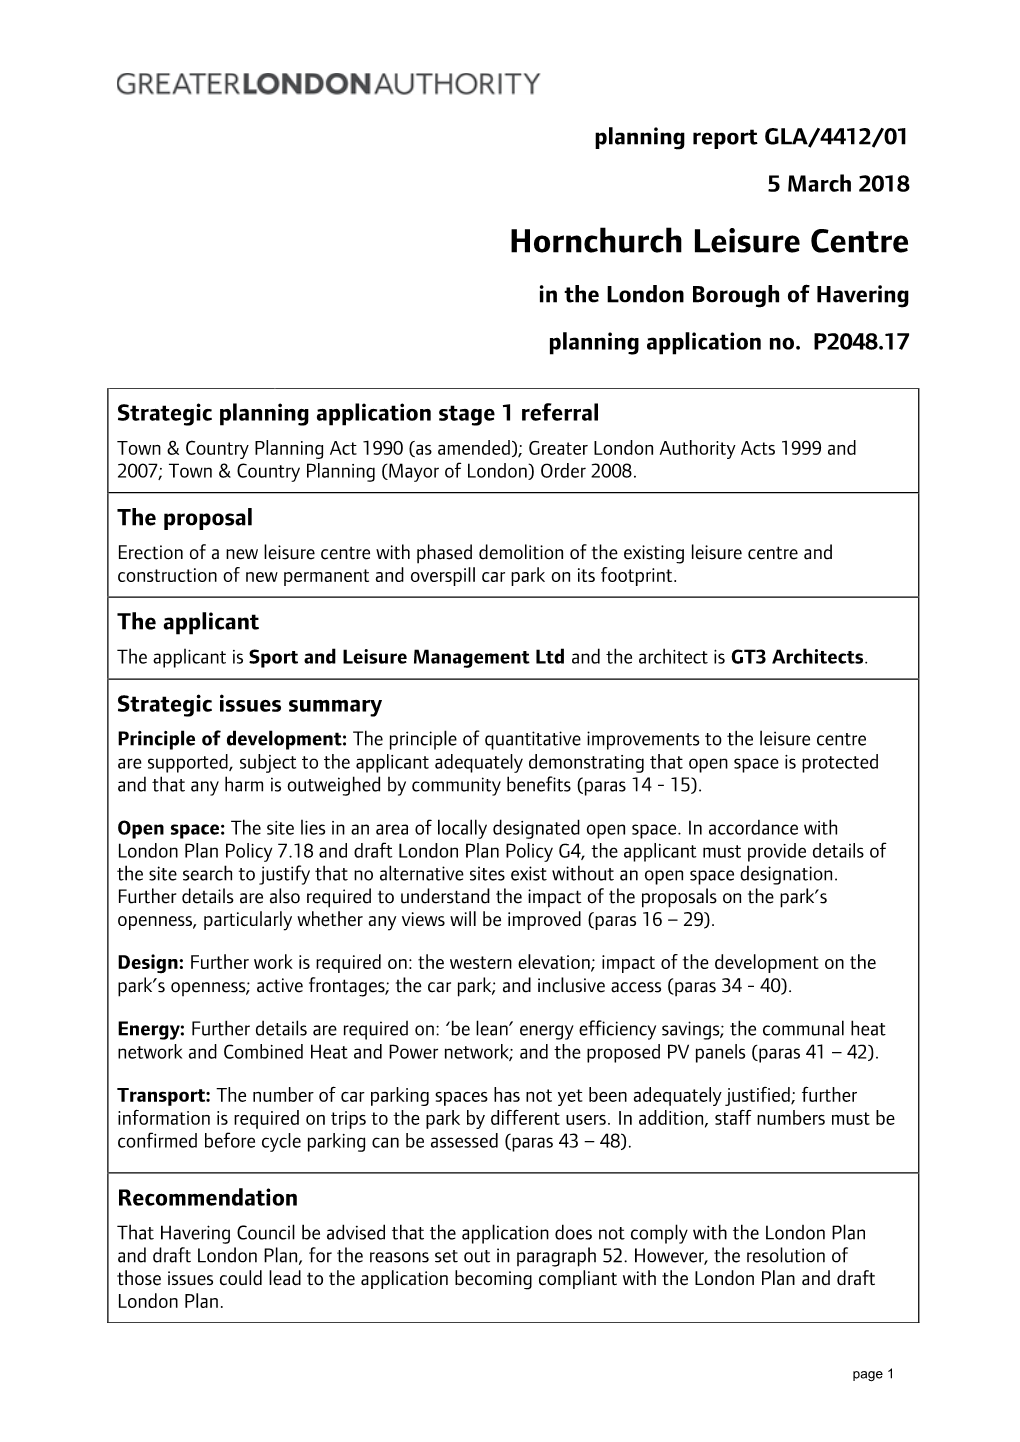 Hornchurch Leisure Centre in the London Borough of Havering